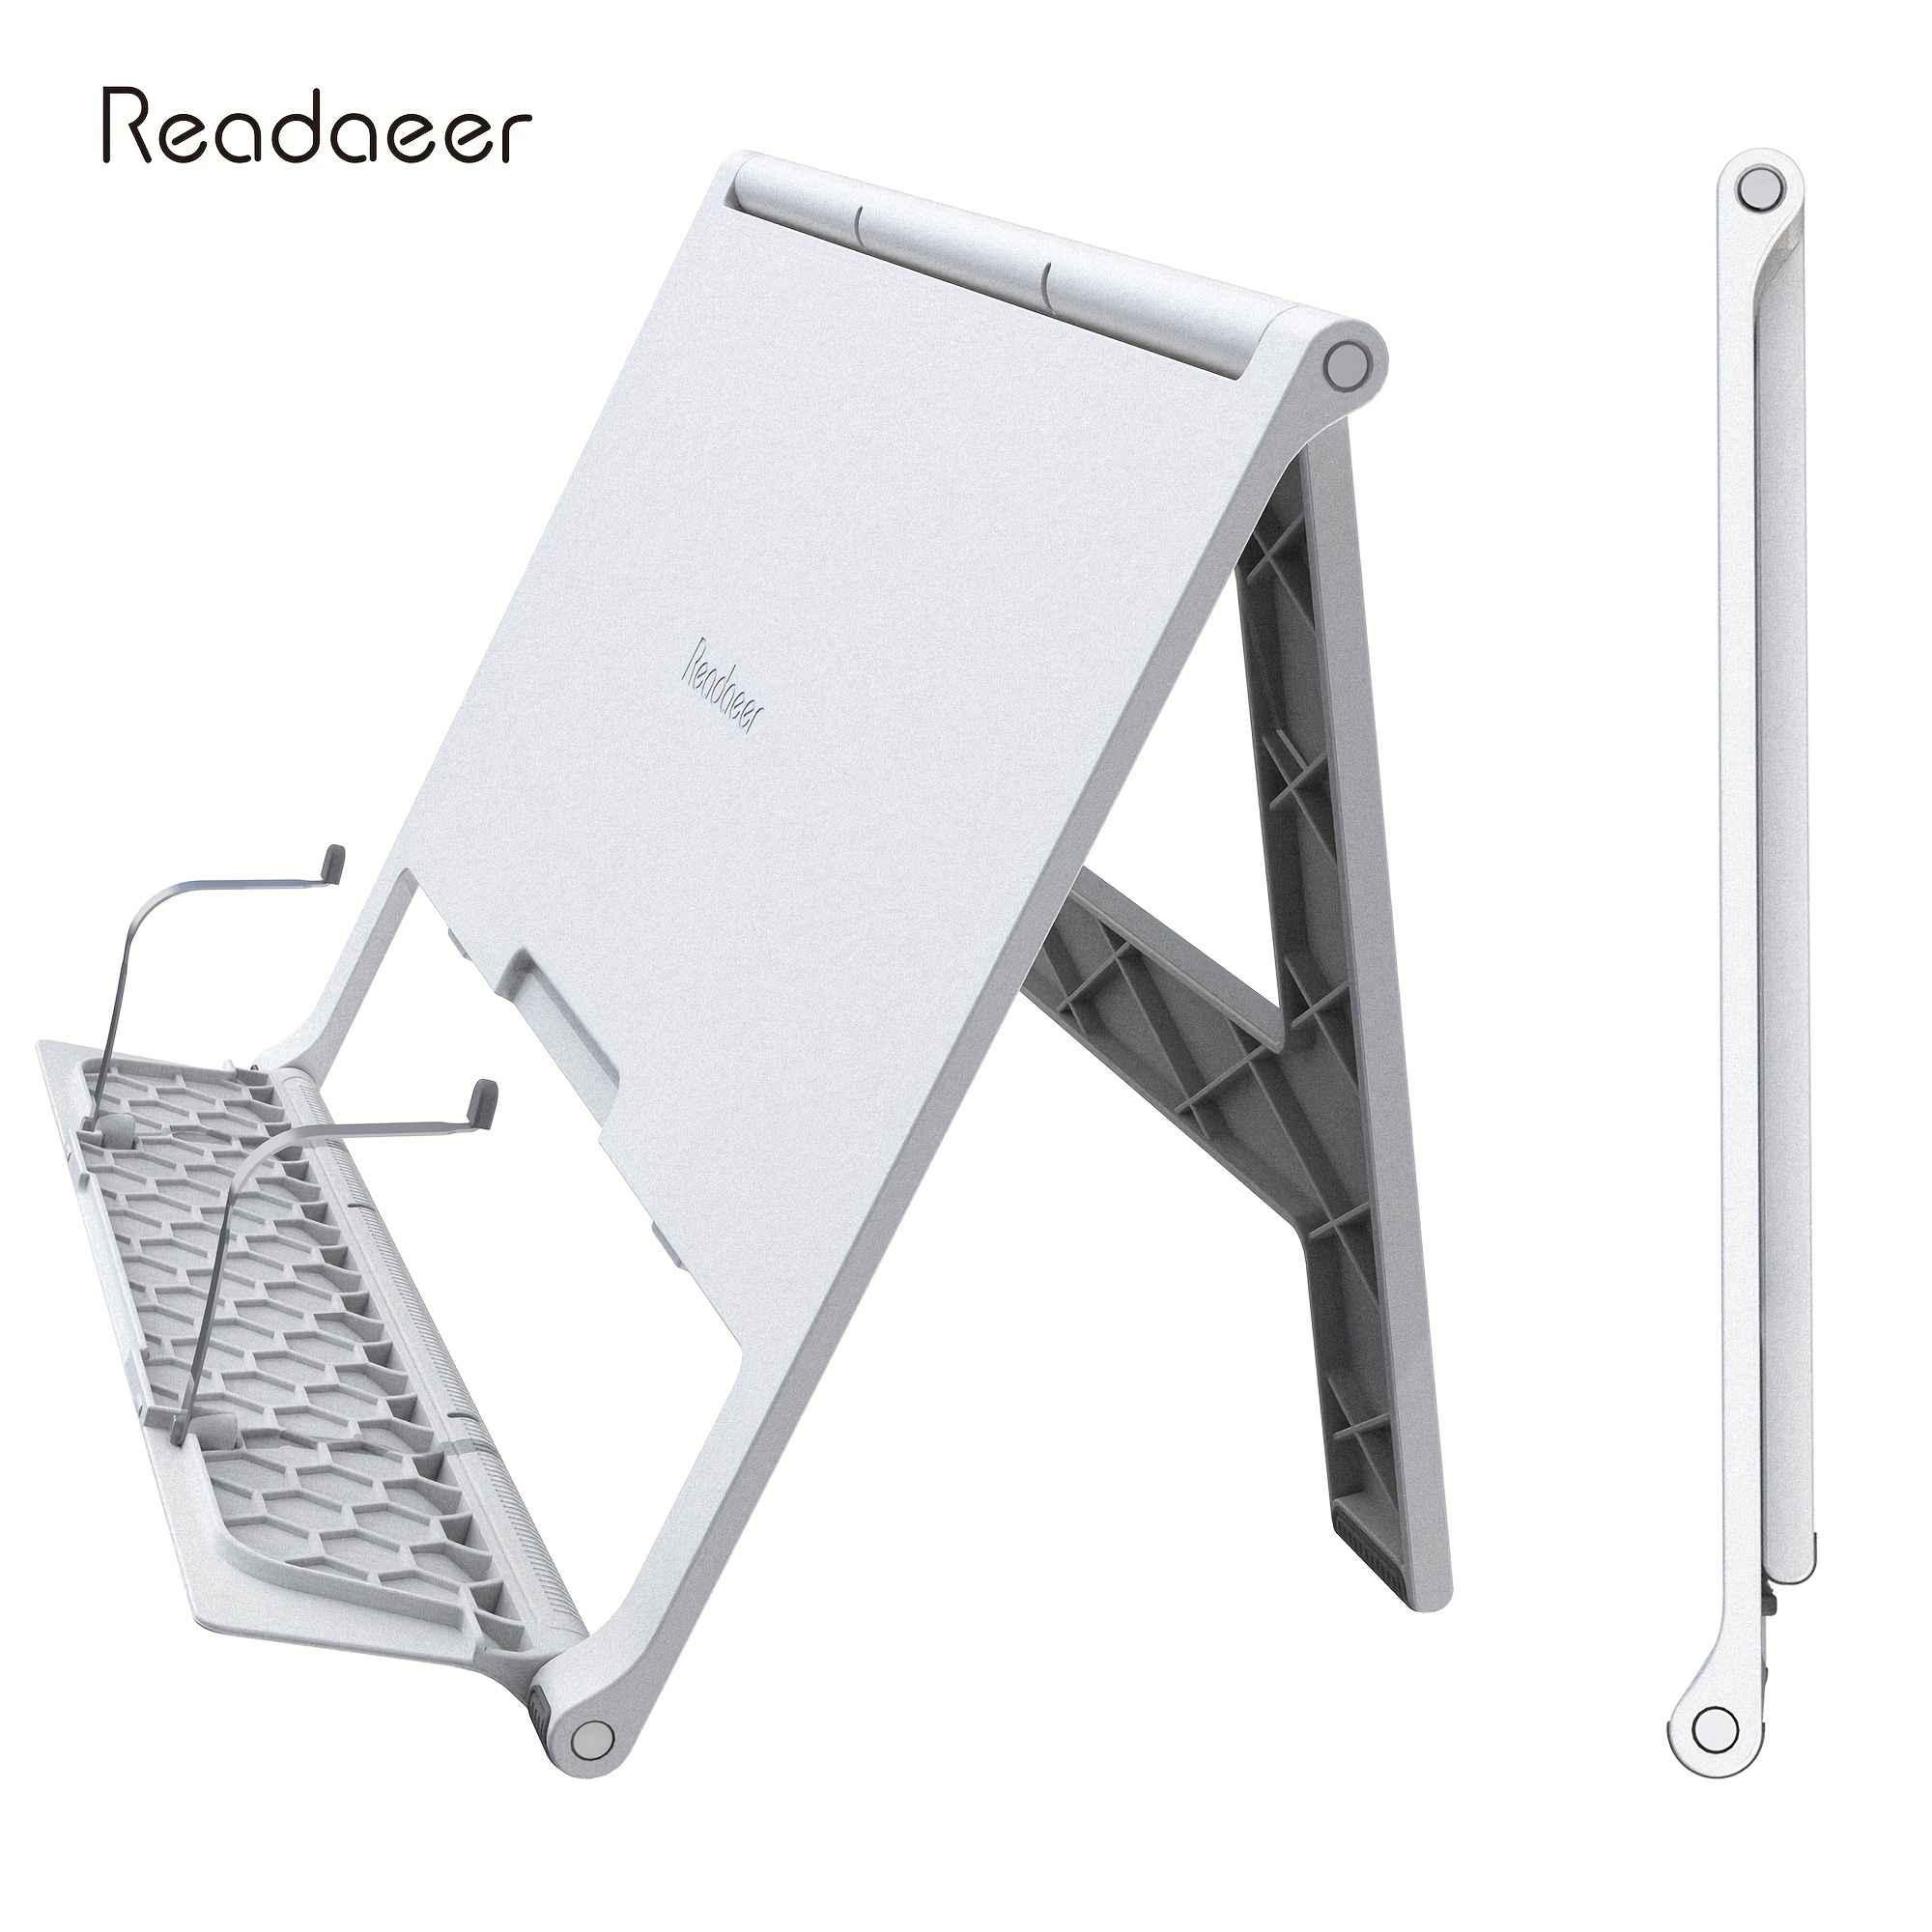 Metal Book Stand for Desk, Adjustable Reading Rest Book Holder, Portable  Cookbook Documents Holder, Sturdy Typing Stand for Recipes Textbooks Tablet